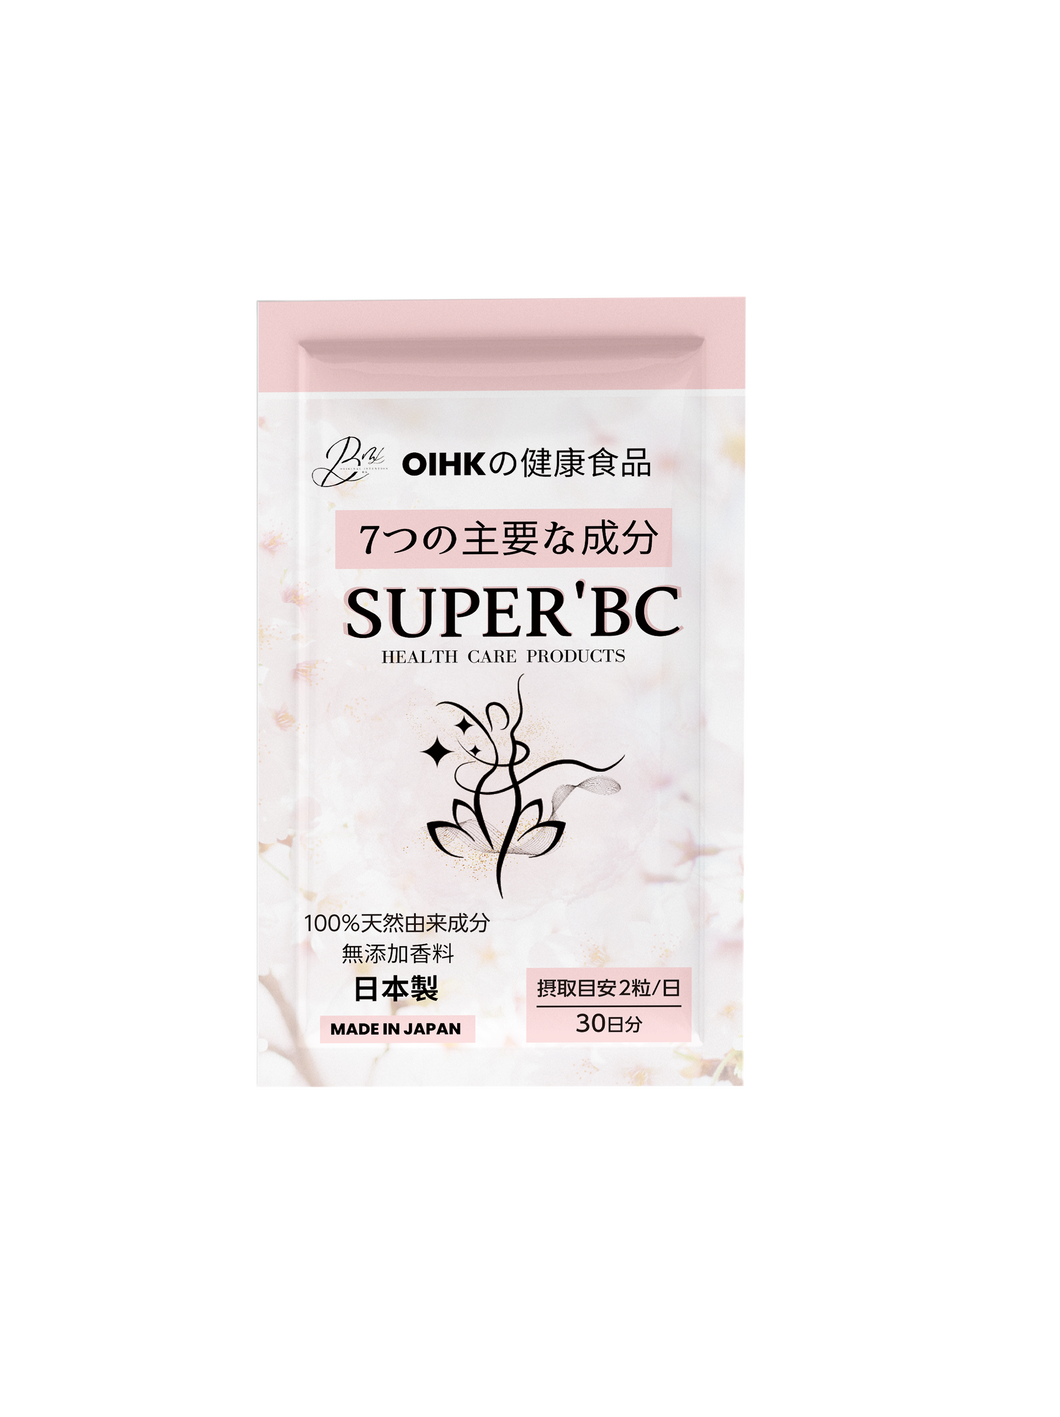 SUPER'BC breast enhancement products 